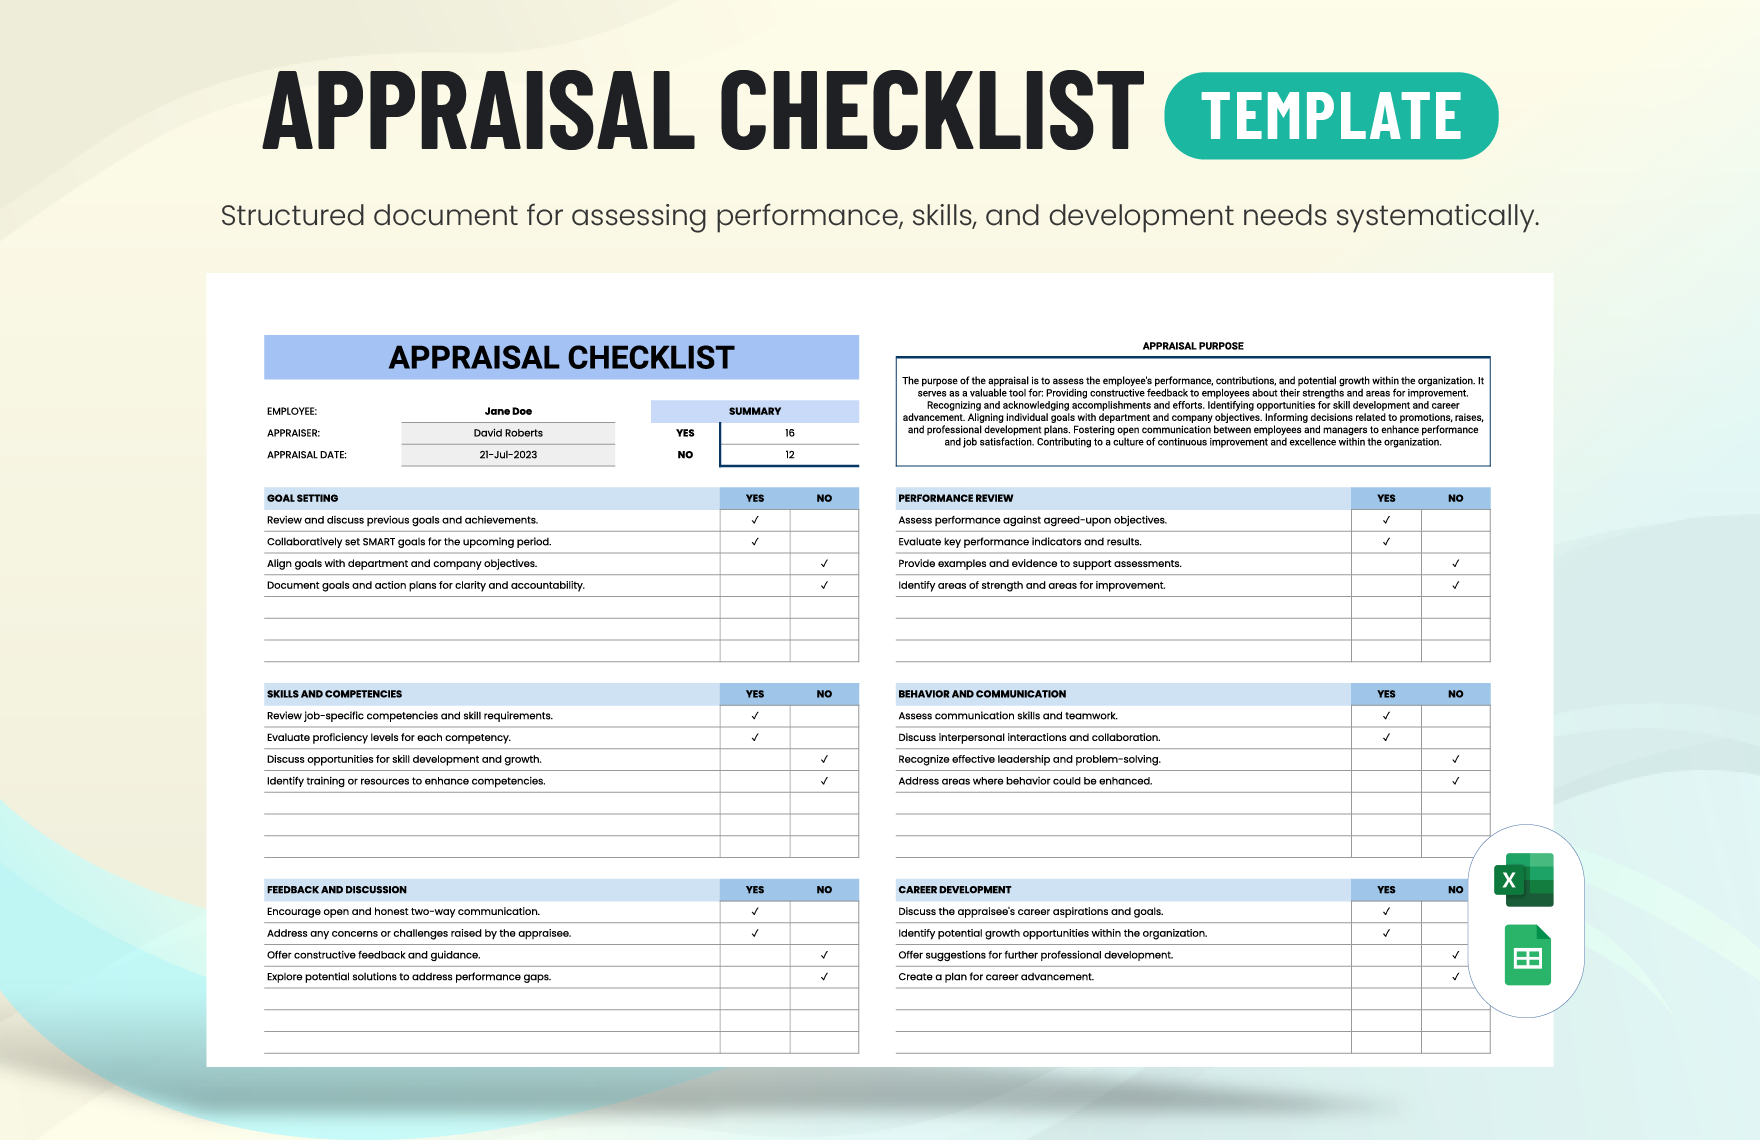 Appraisal Checklist Template in Excel, Google Sheets